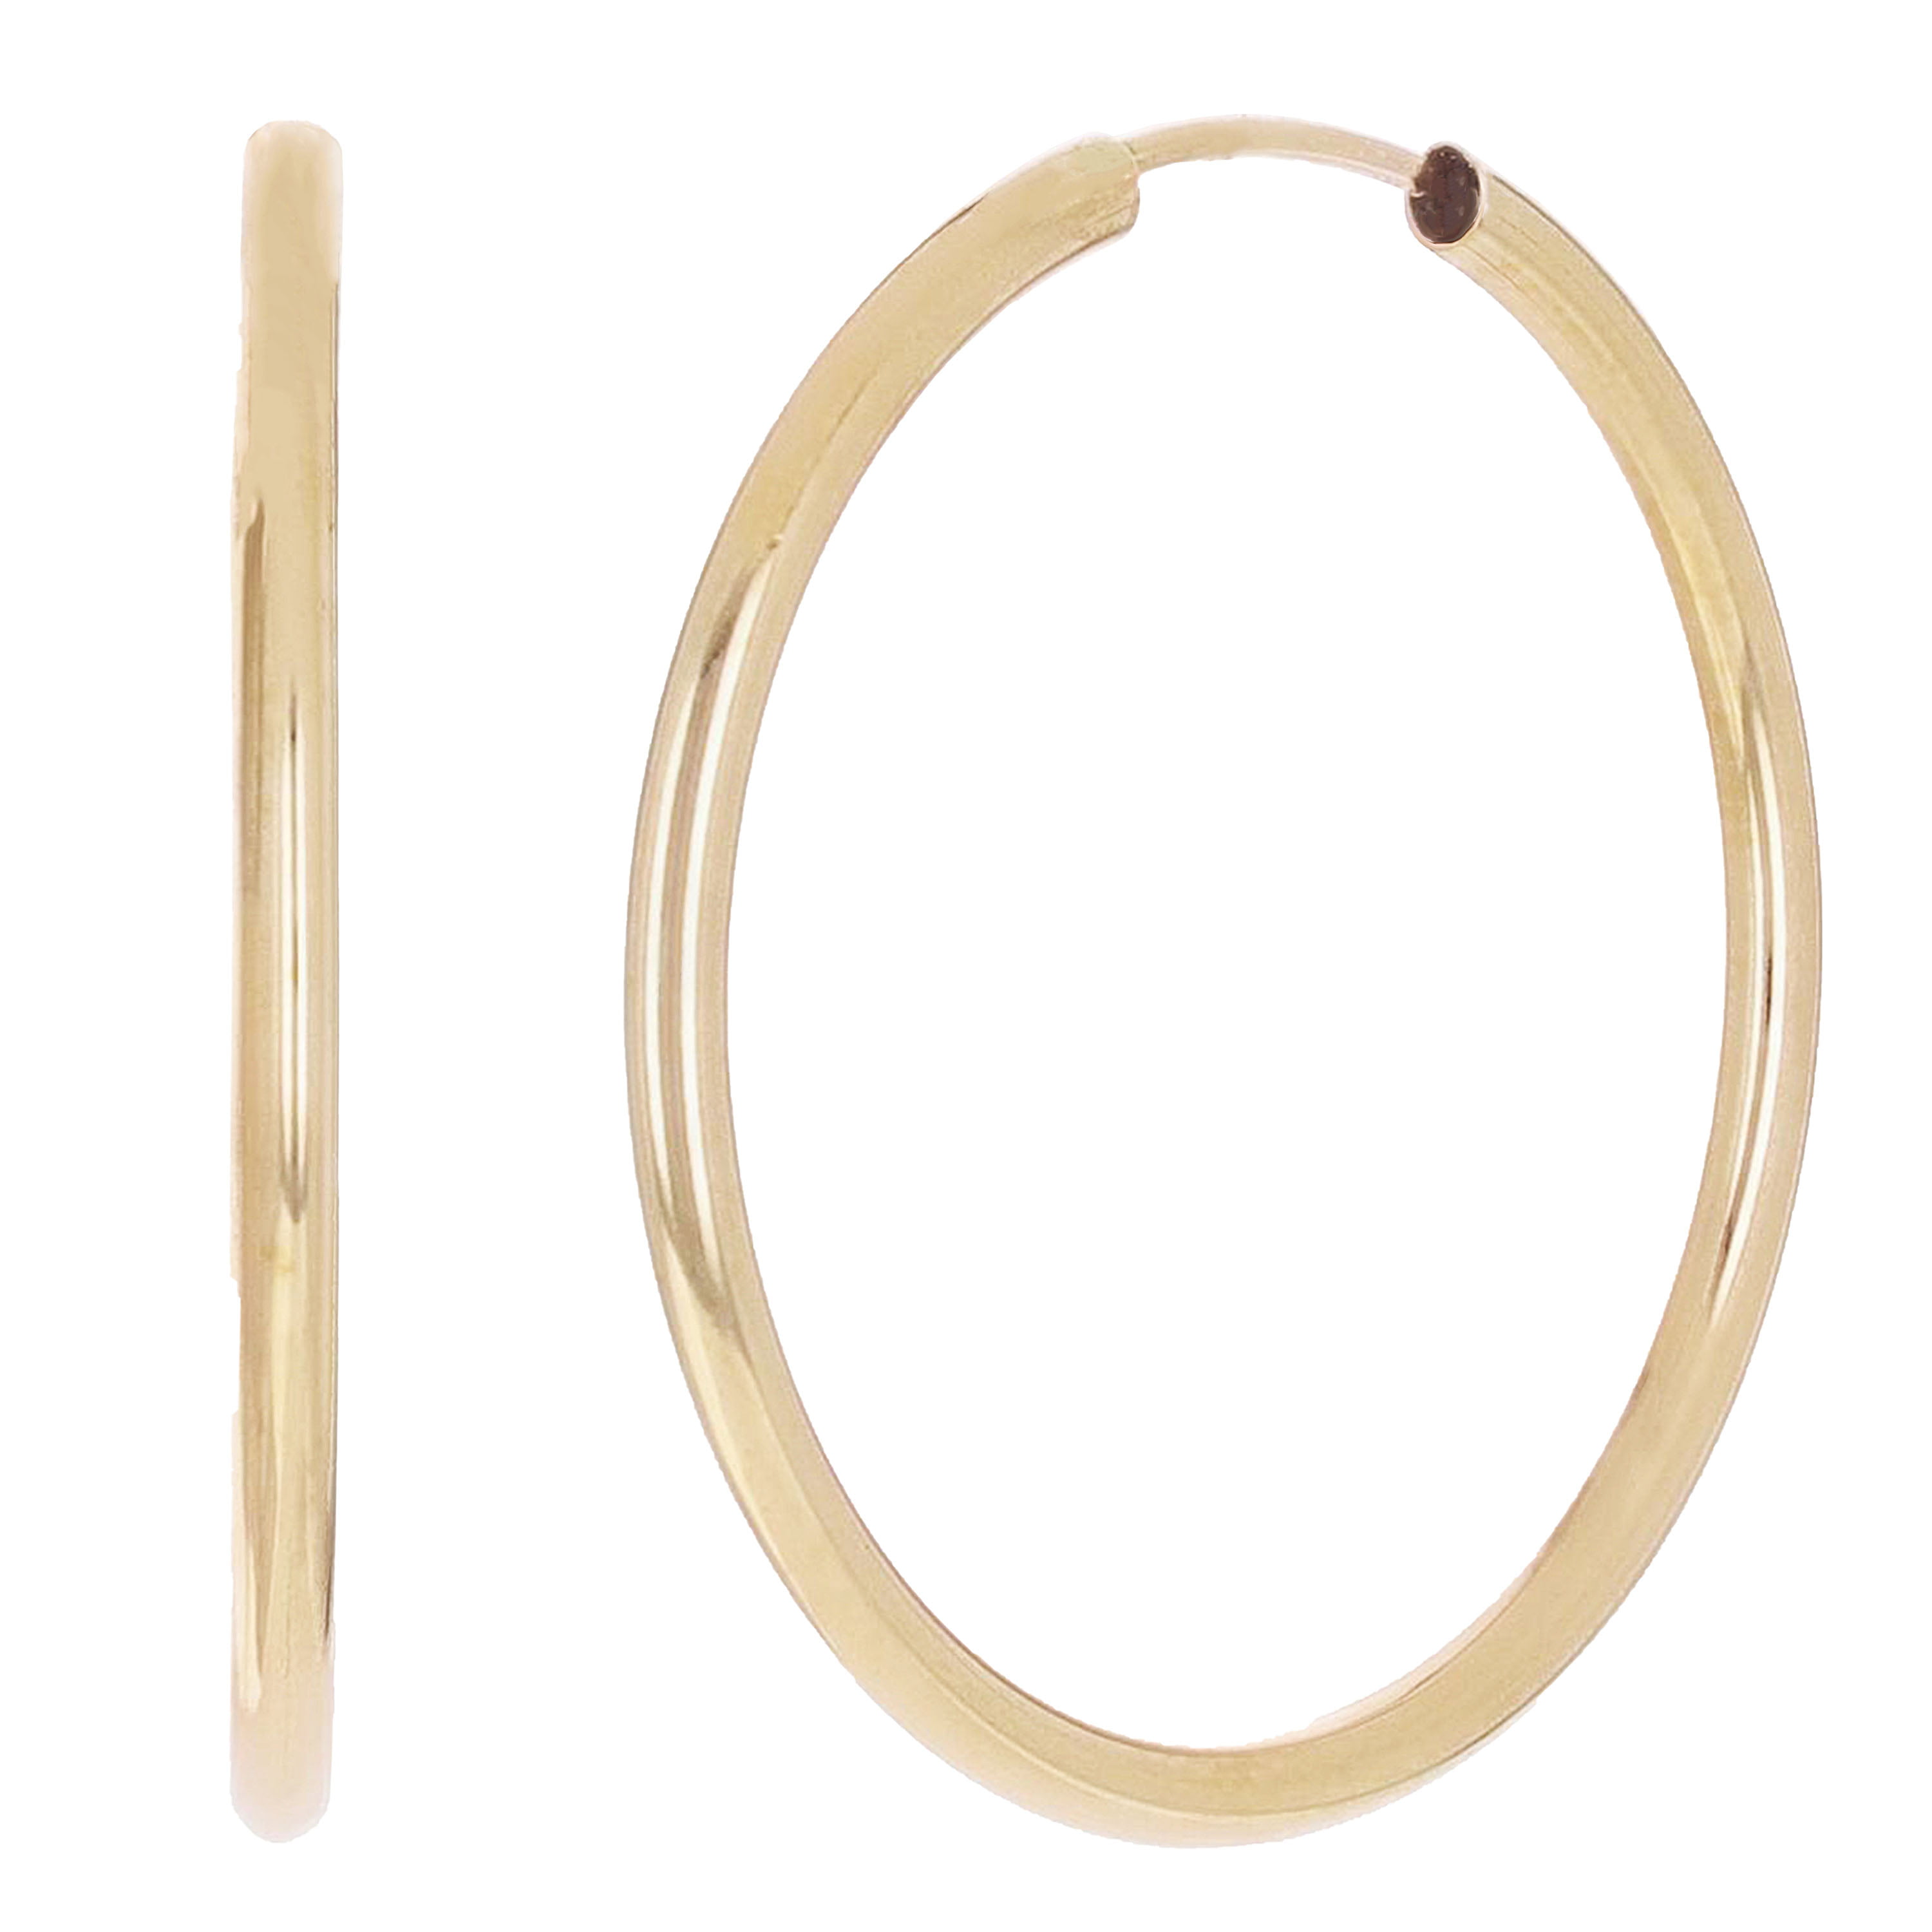 14K Yellow Gold Polished Endless Tube Hoop Earrings Approximate Measurements 45mm x 45mm